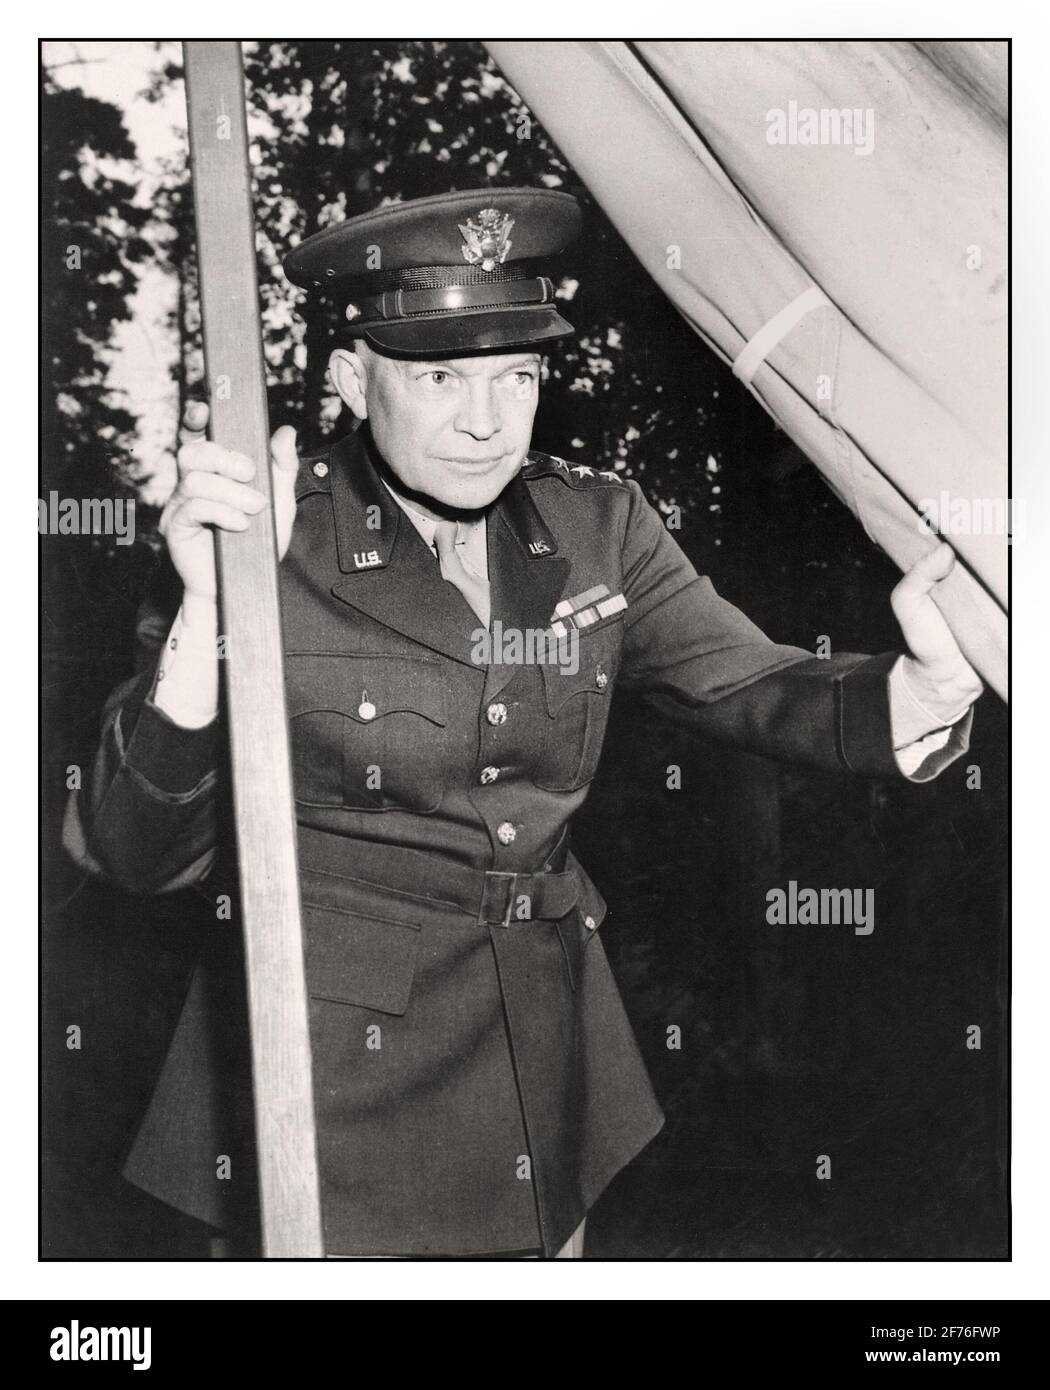 Dwight D Eisenhower promotional image and morale booster at D Day France WW2 World War II Stock Photo